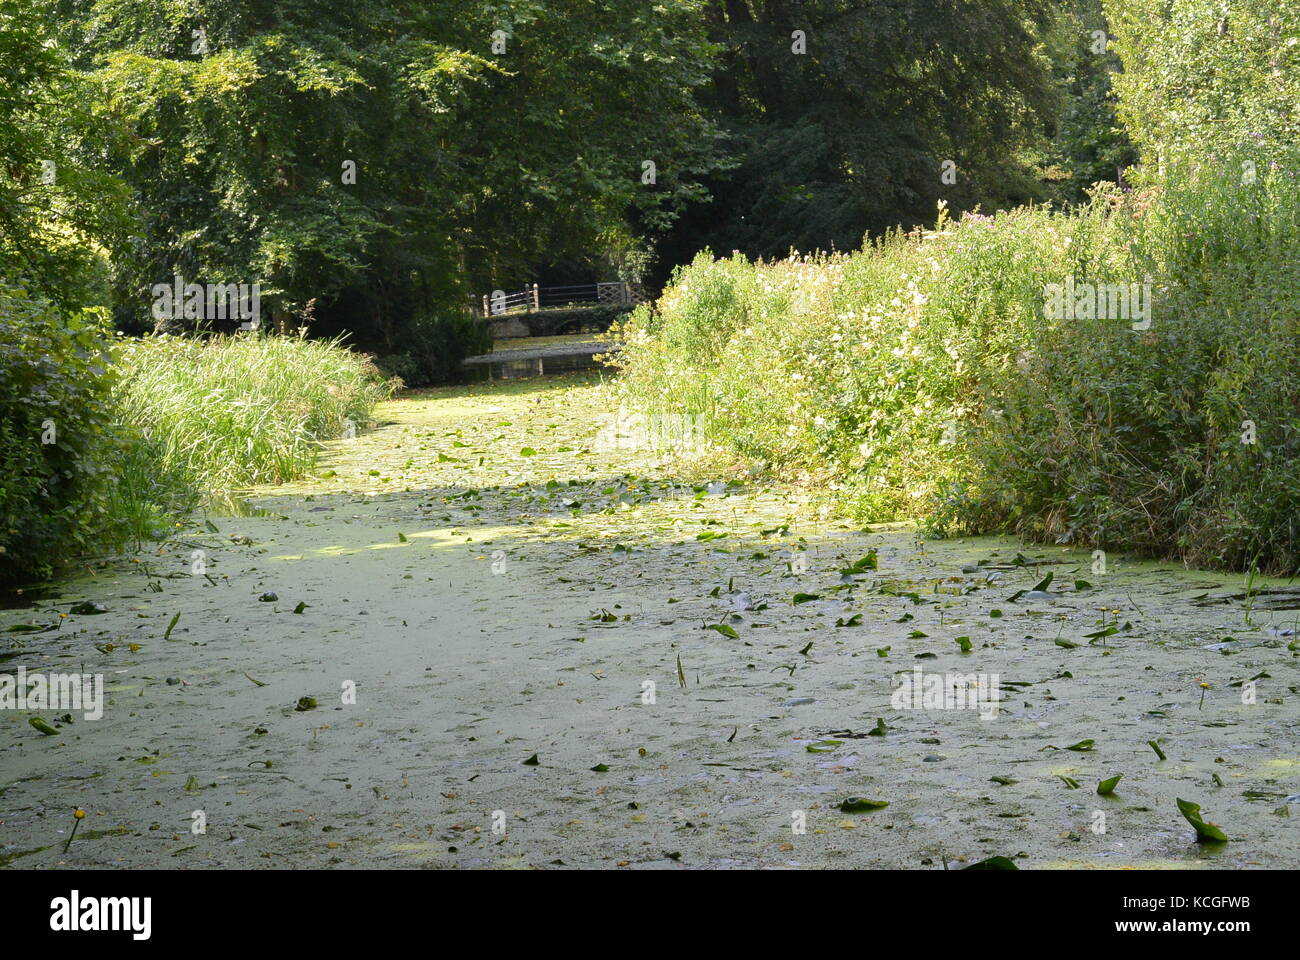 Canal par abbaye d'Anglesey cambridge Banque D'Images